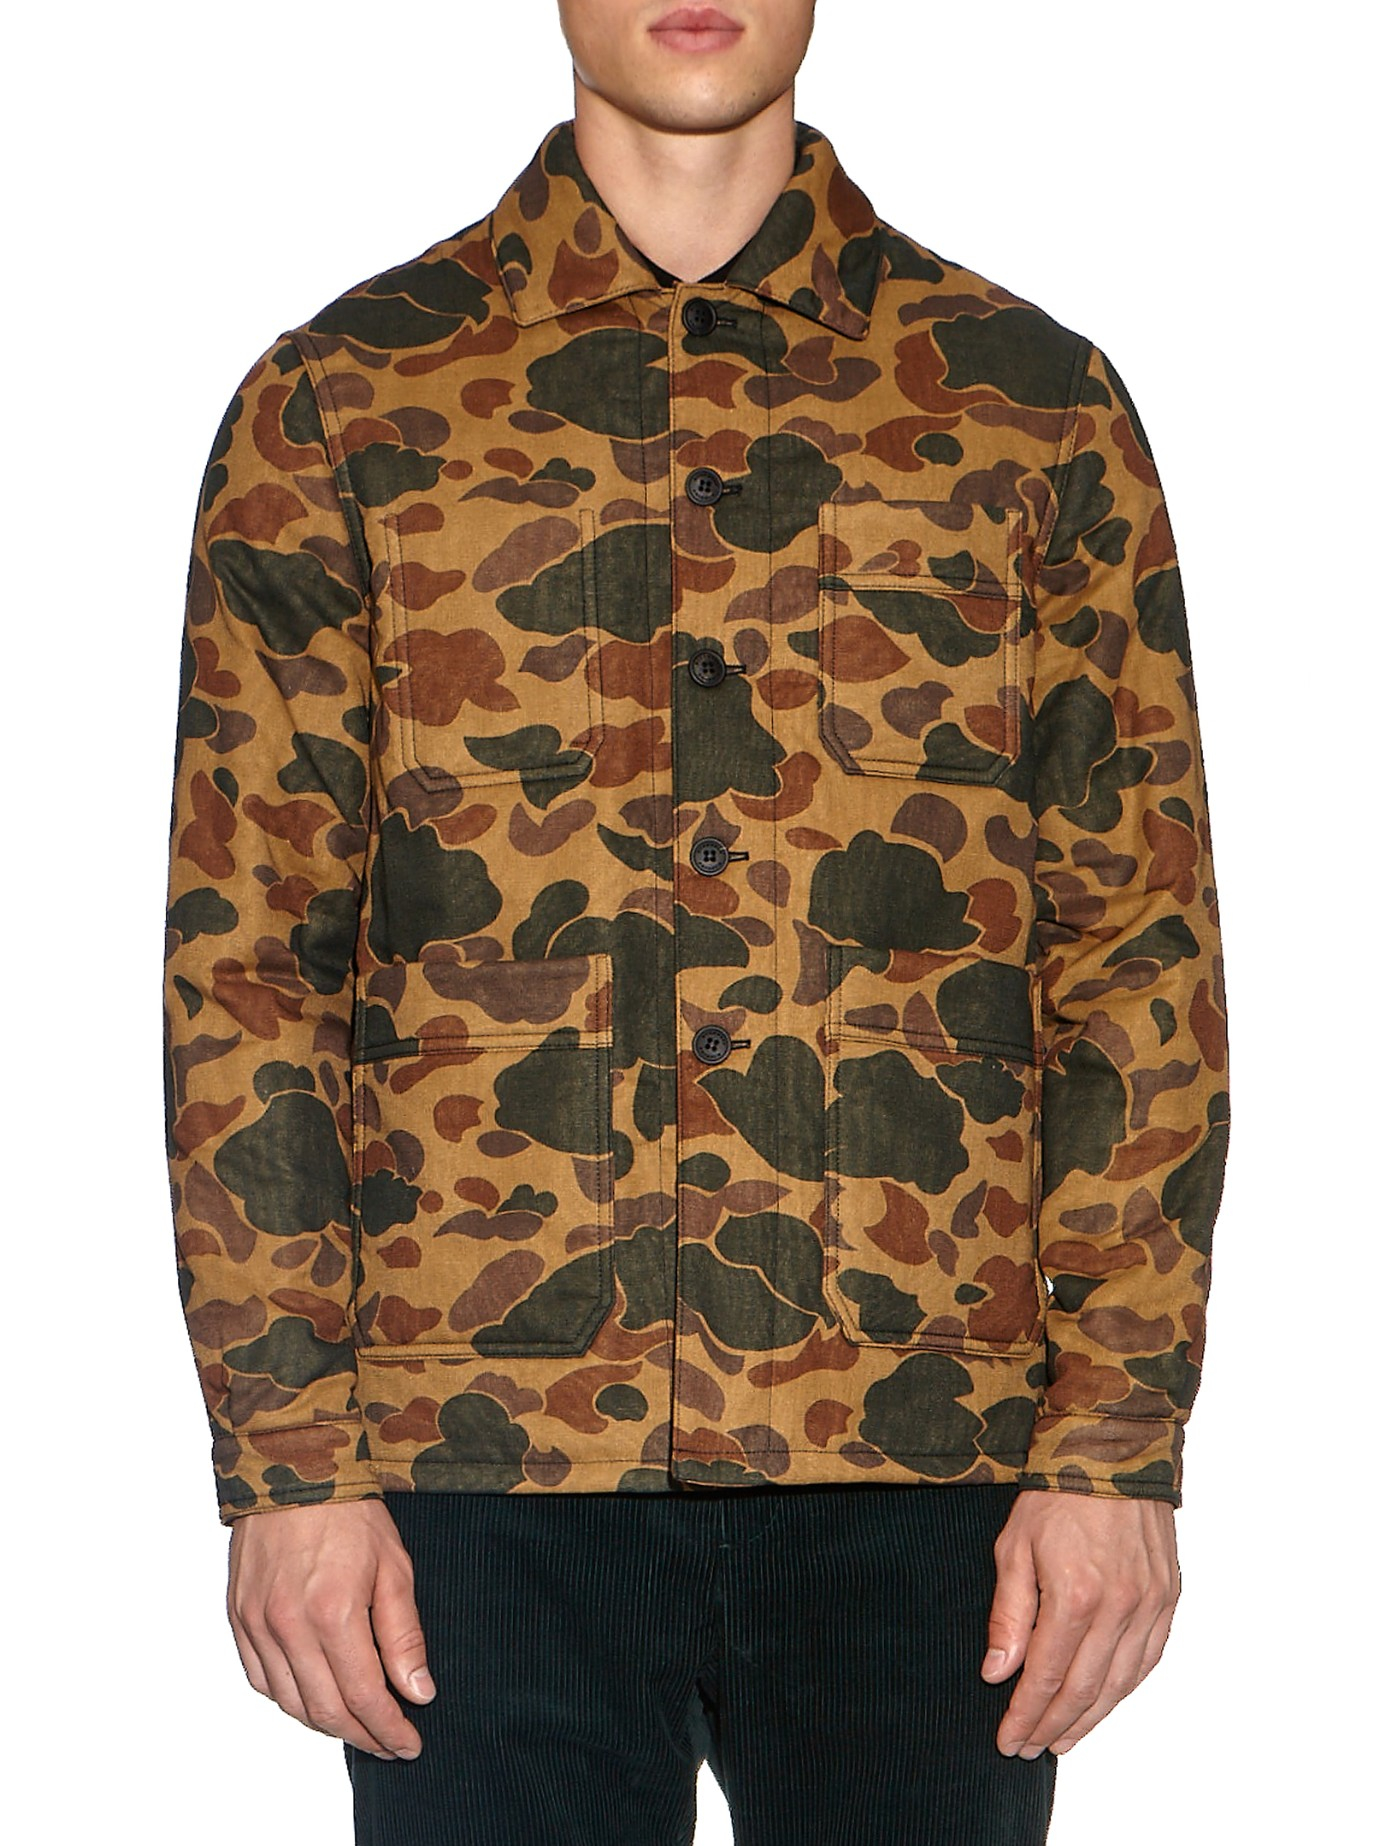 Burberry prorsum Camouflage-Print Cotton Jacket in Brown for Men (BROWN ...